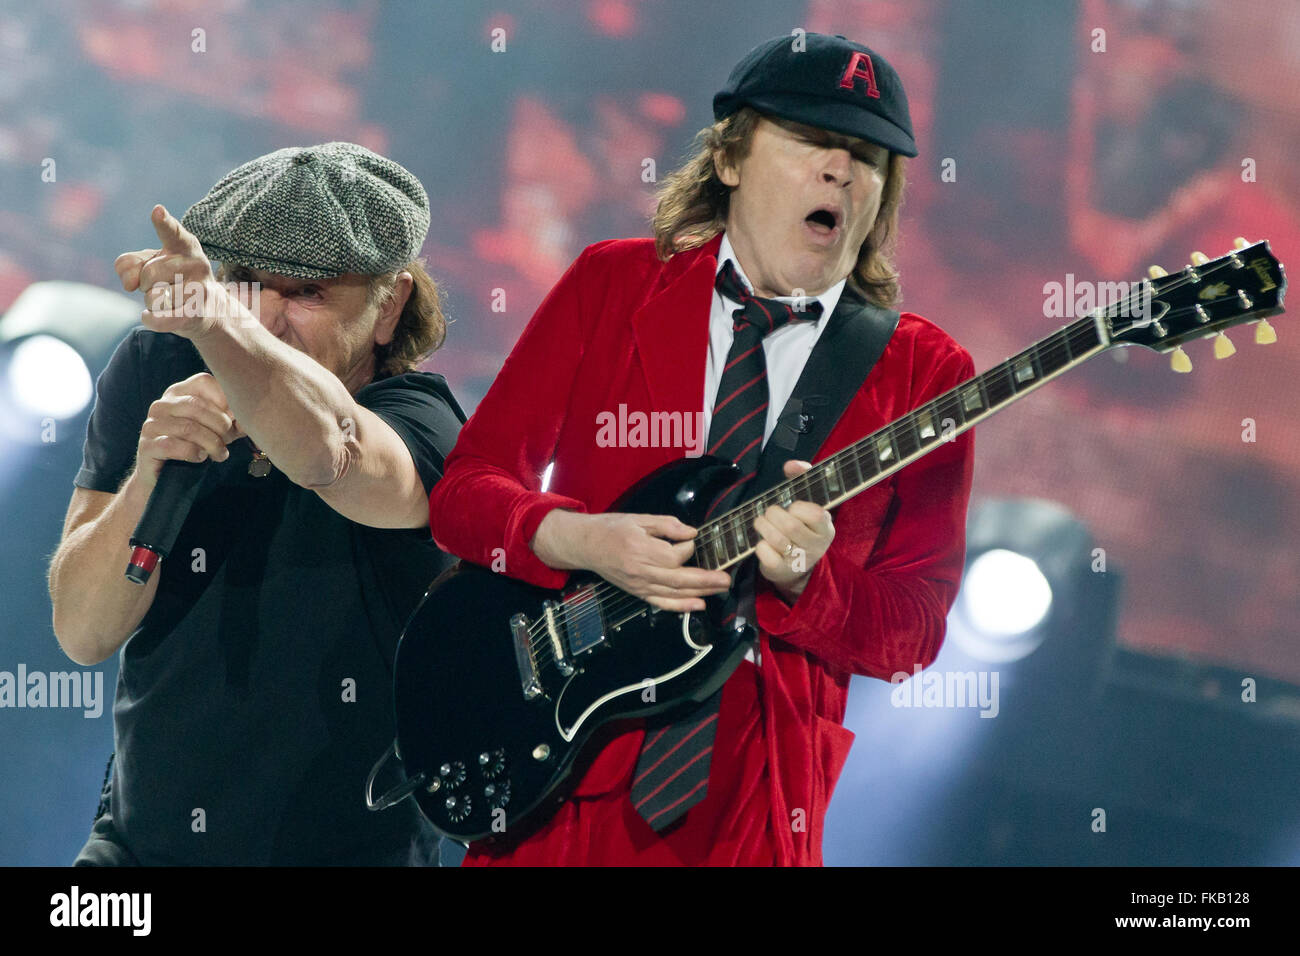 Nuremberg, Germany. 8th May, 2015. Singer of the Australian rock band AC/DC, Brian Johnson (l), and guitarist Angus Young on stage at the start of their German tour in Nuremberg, Germany, 8 May 2015. Photo: Daniel Karmann/dpa/Alamy Live News Stock Photo